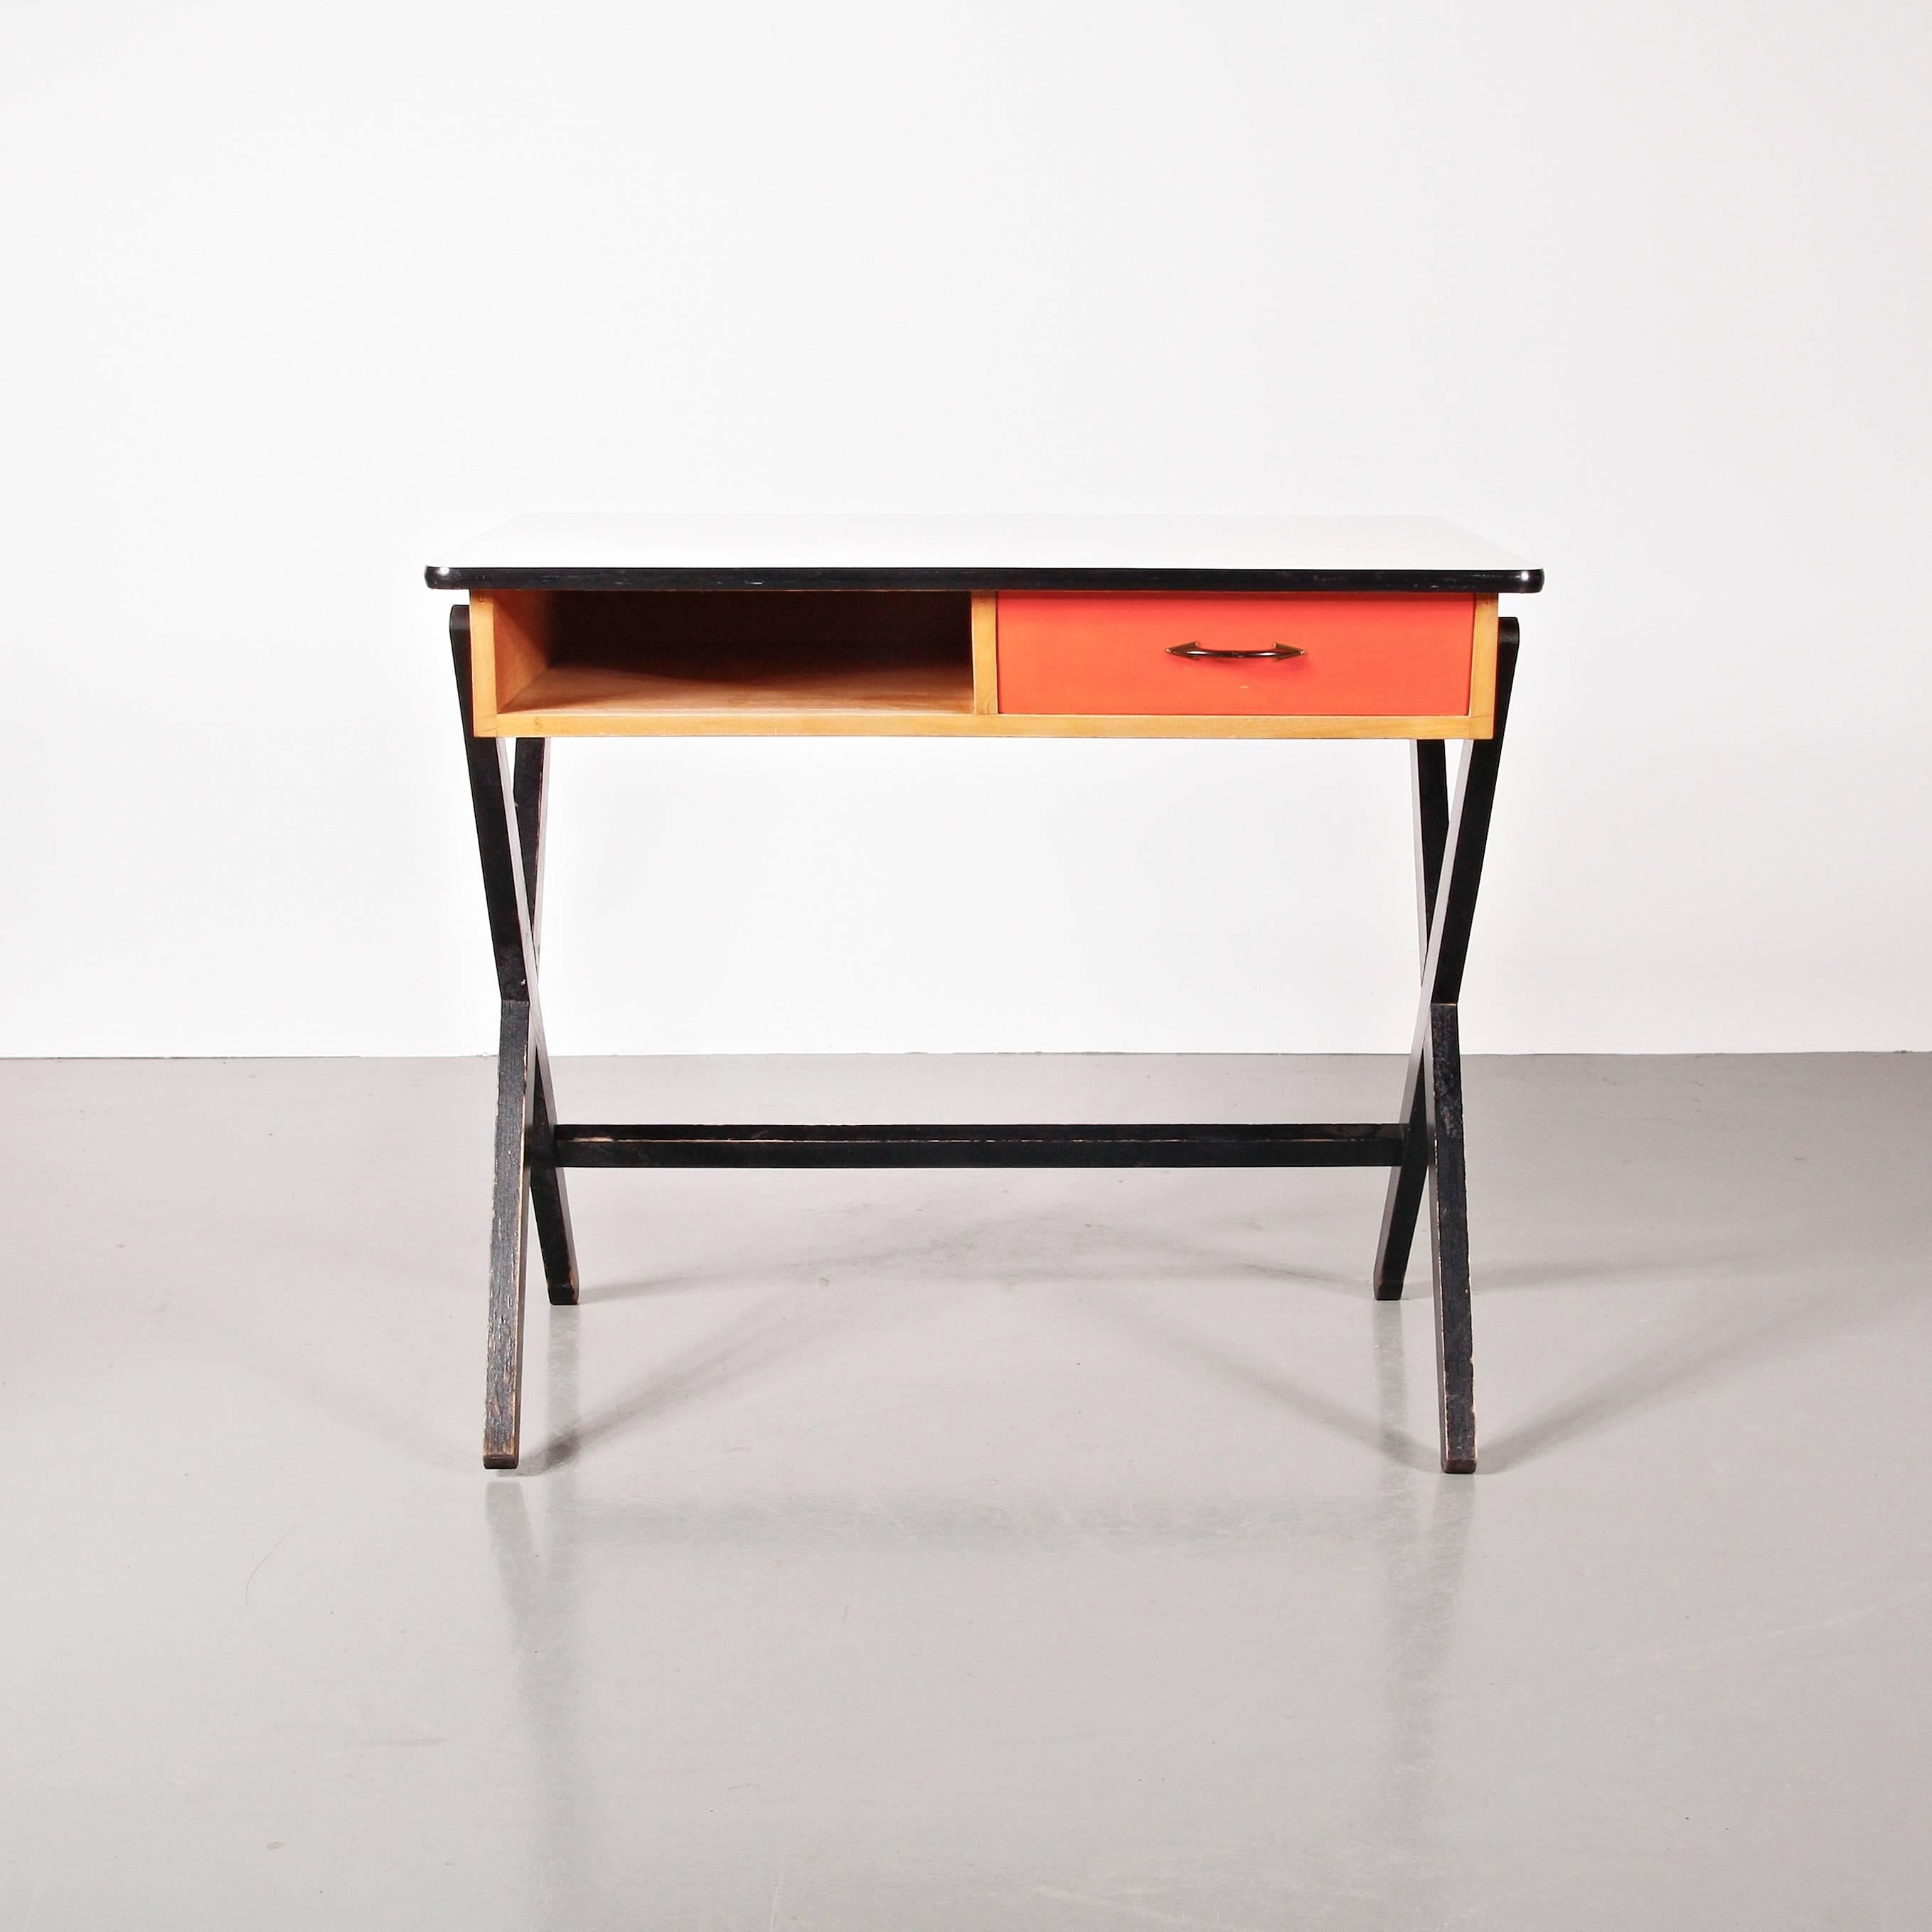 Desk designed by Coen de Vries, circa 1950. Manufactured by Devo (Netherlands) 

Lacquered wood frame, formica tabletop. 

In good original condition, with minor wear consistent with age and use, preserving a nice patina.